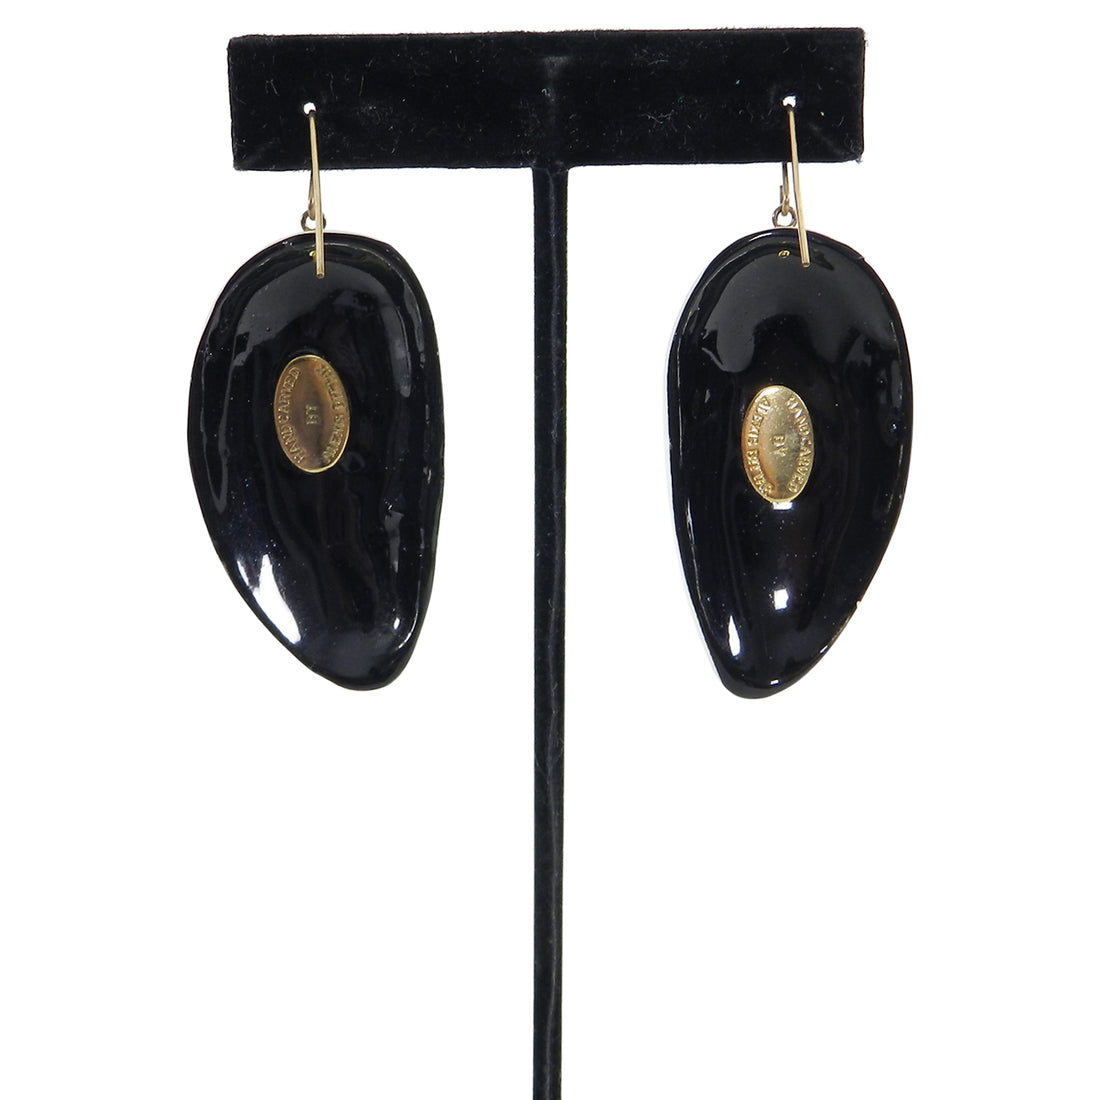 Alexis Bittar Pearly White Resin Drop Earrings